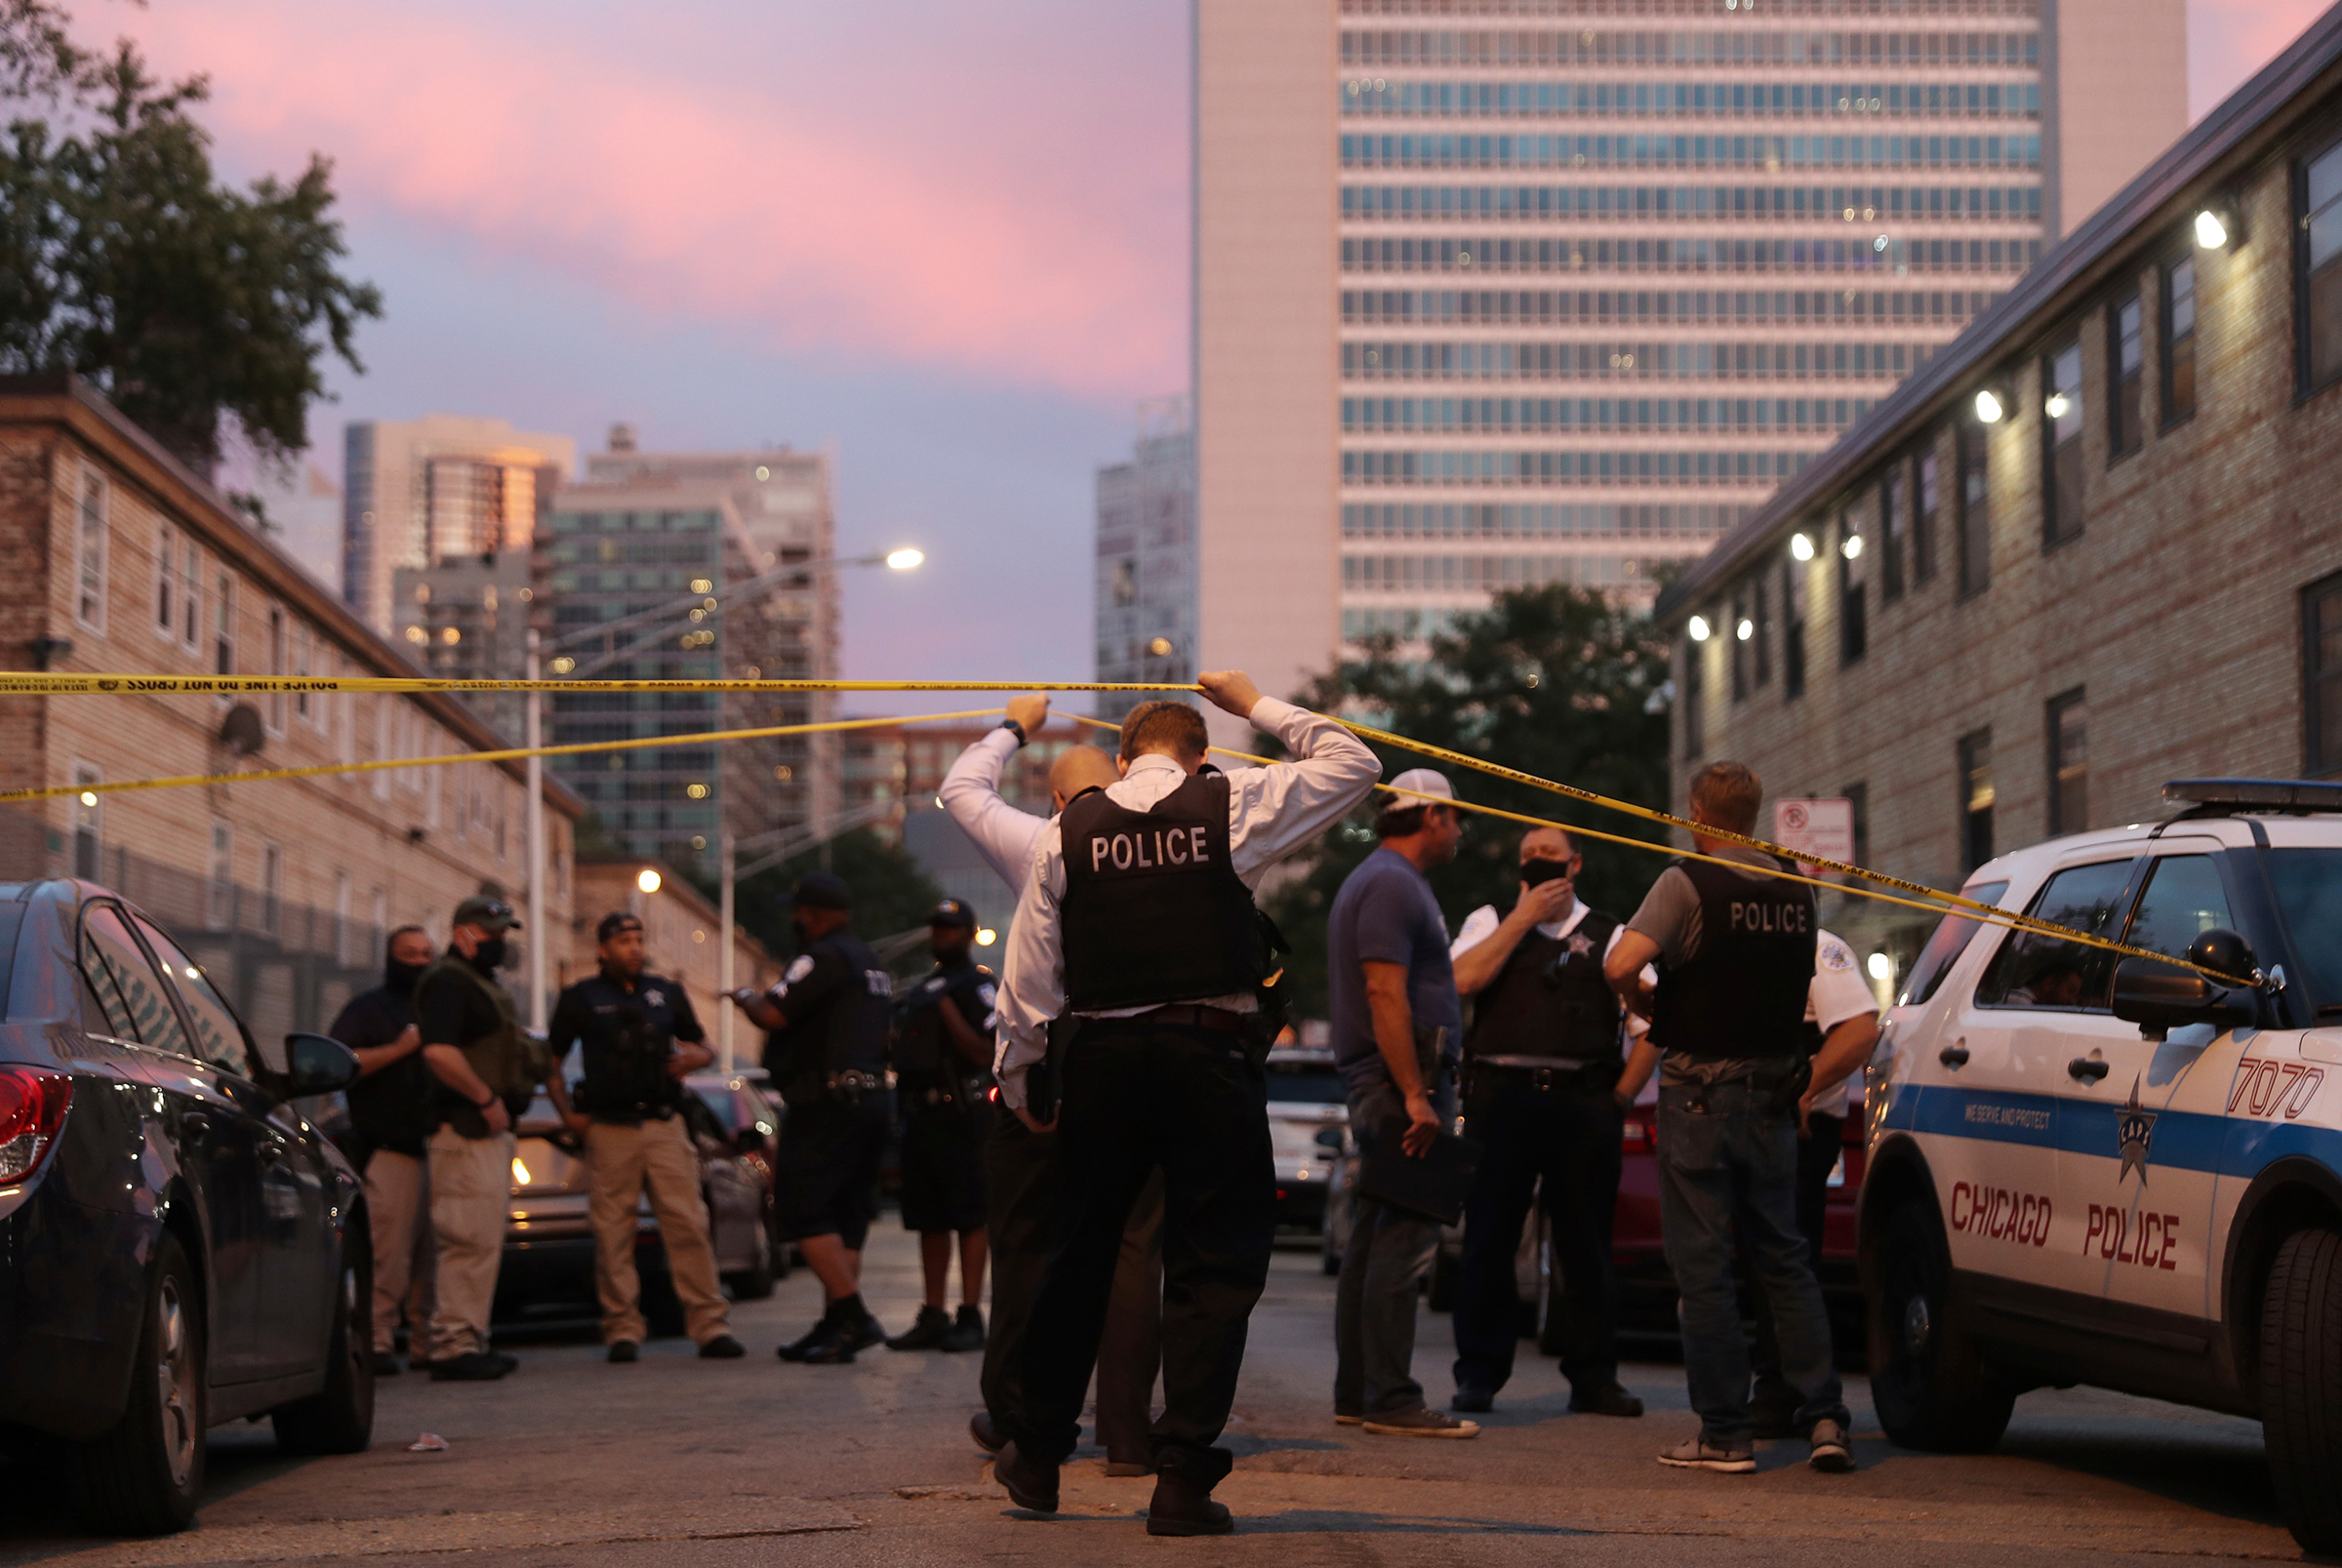 An unrelenting wave of deadly shootings has hit Chicago this summer amid the pandemic